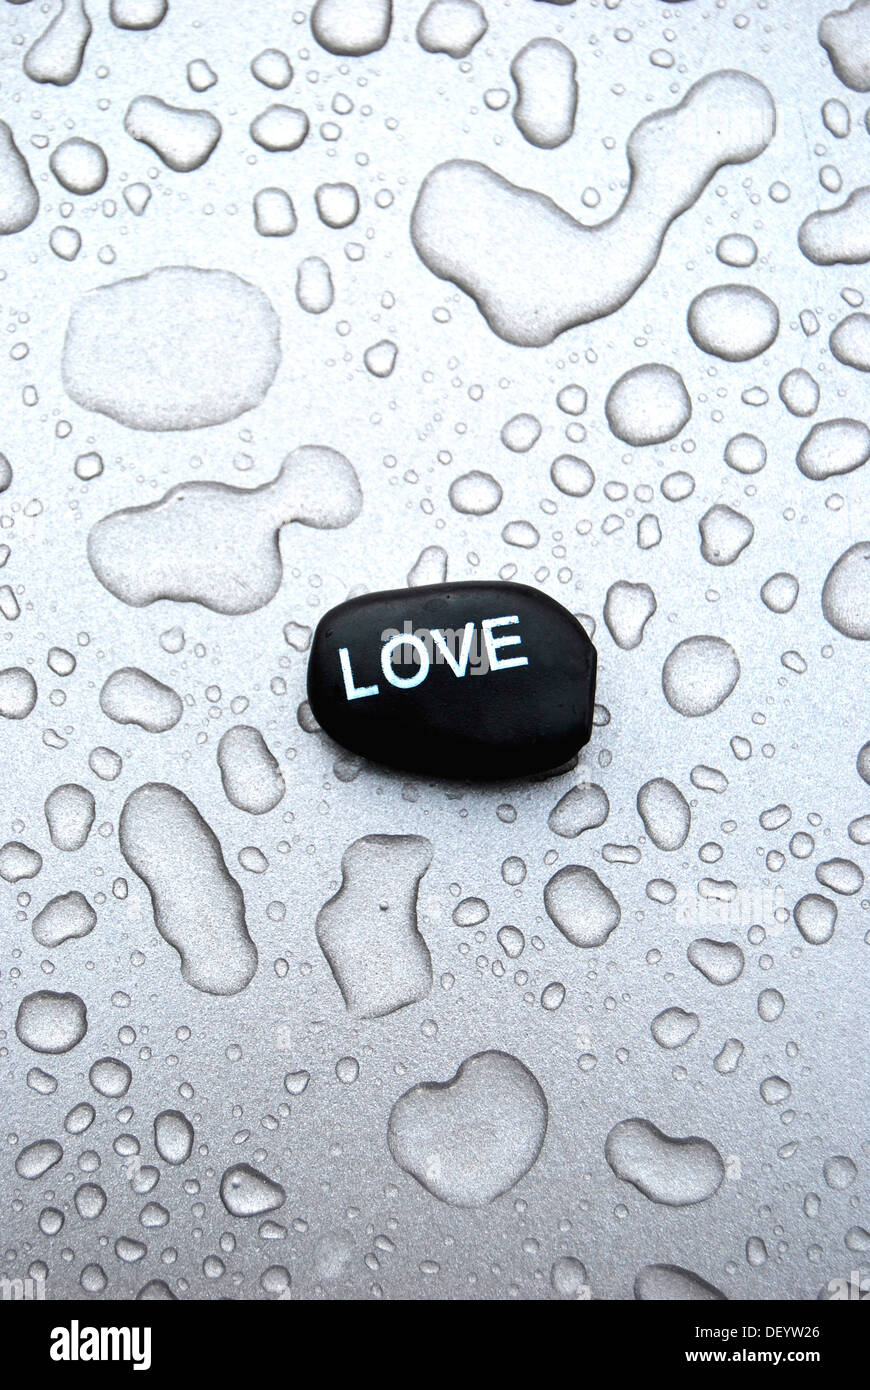 Hot stone massage stone with the inscription Love on a surface with water drops Stock Photo